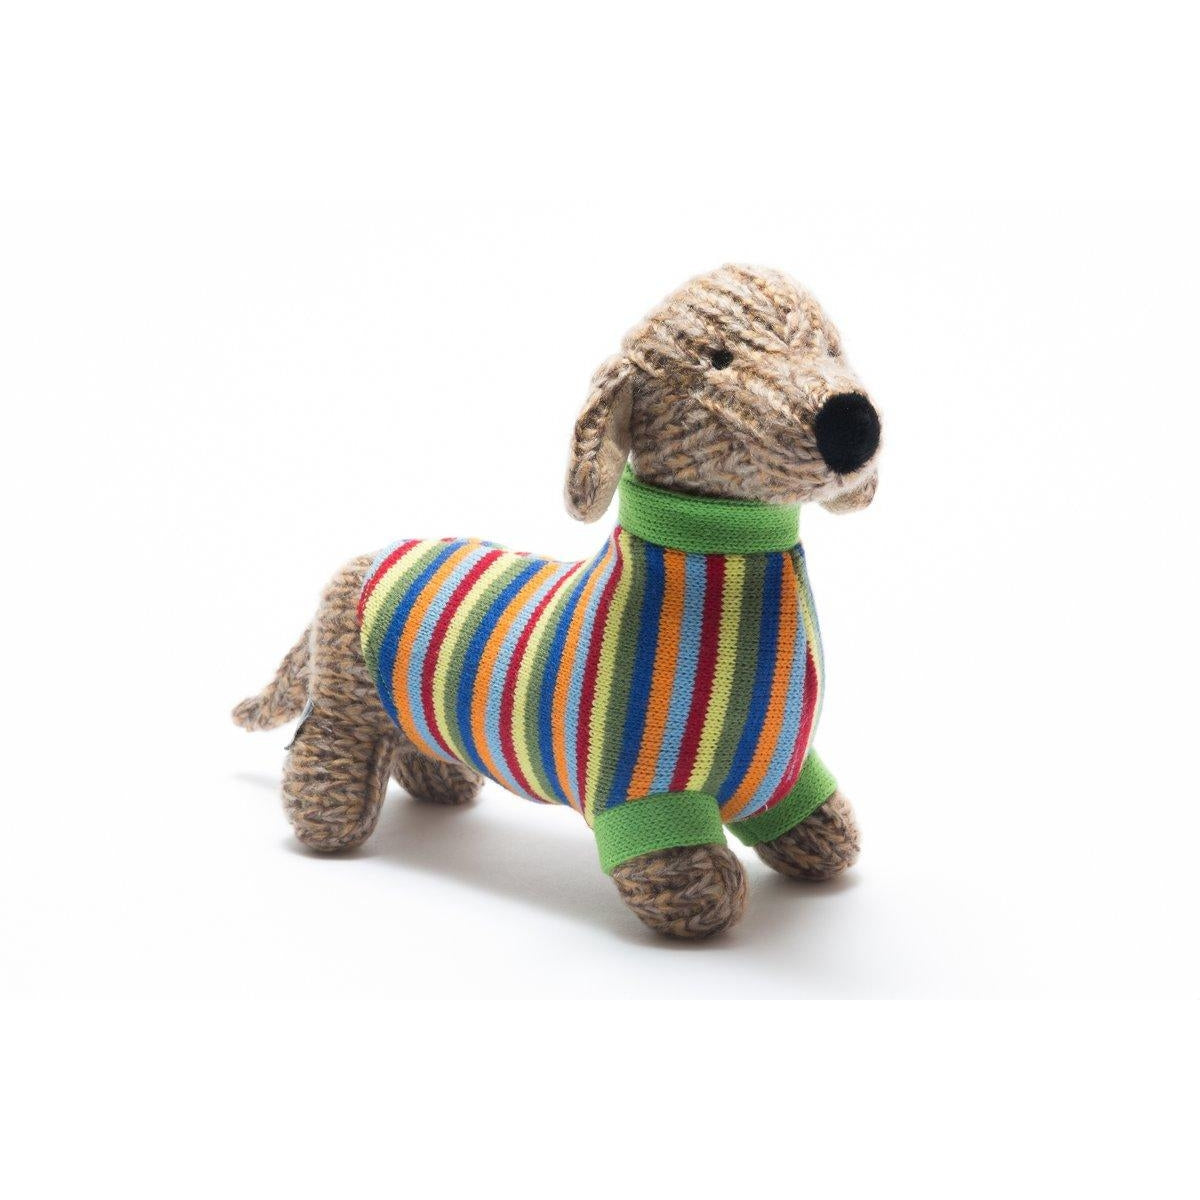 Sausage Dog Plush Toy from Best Years Ltd